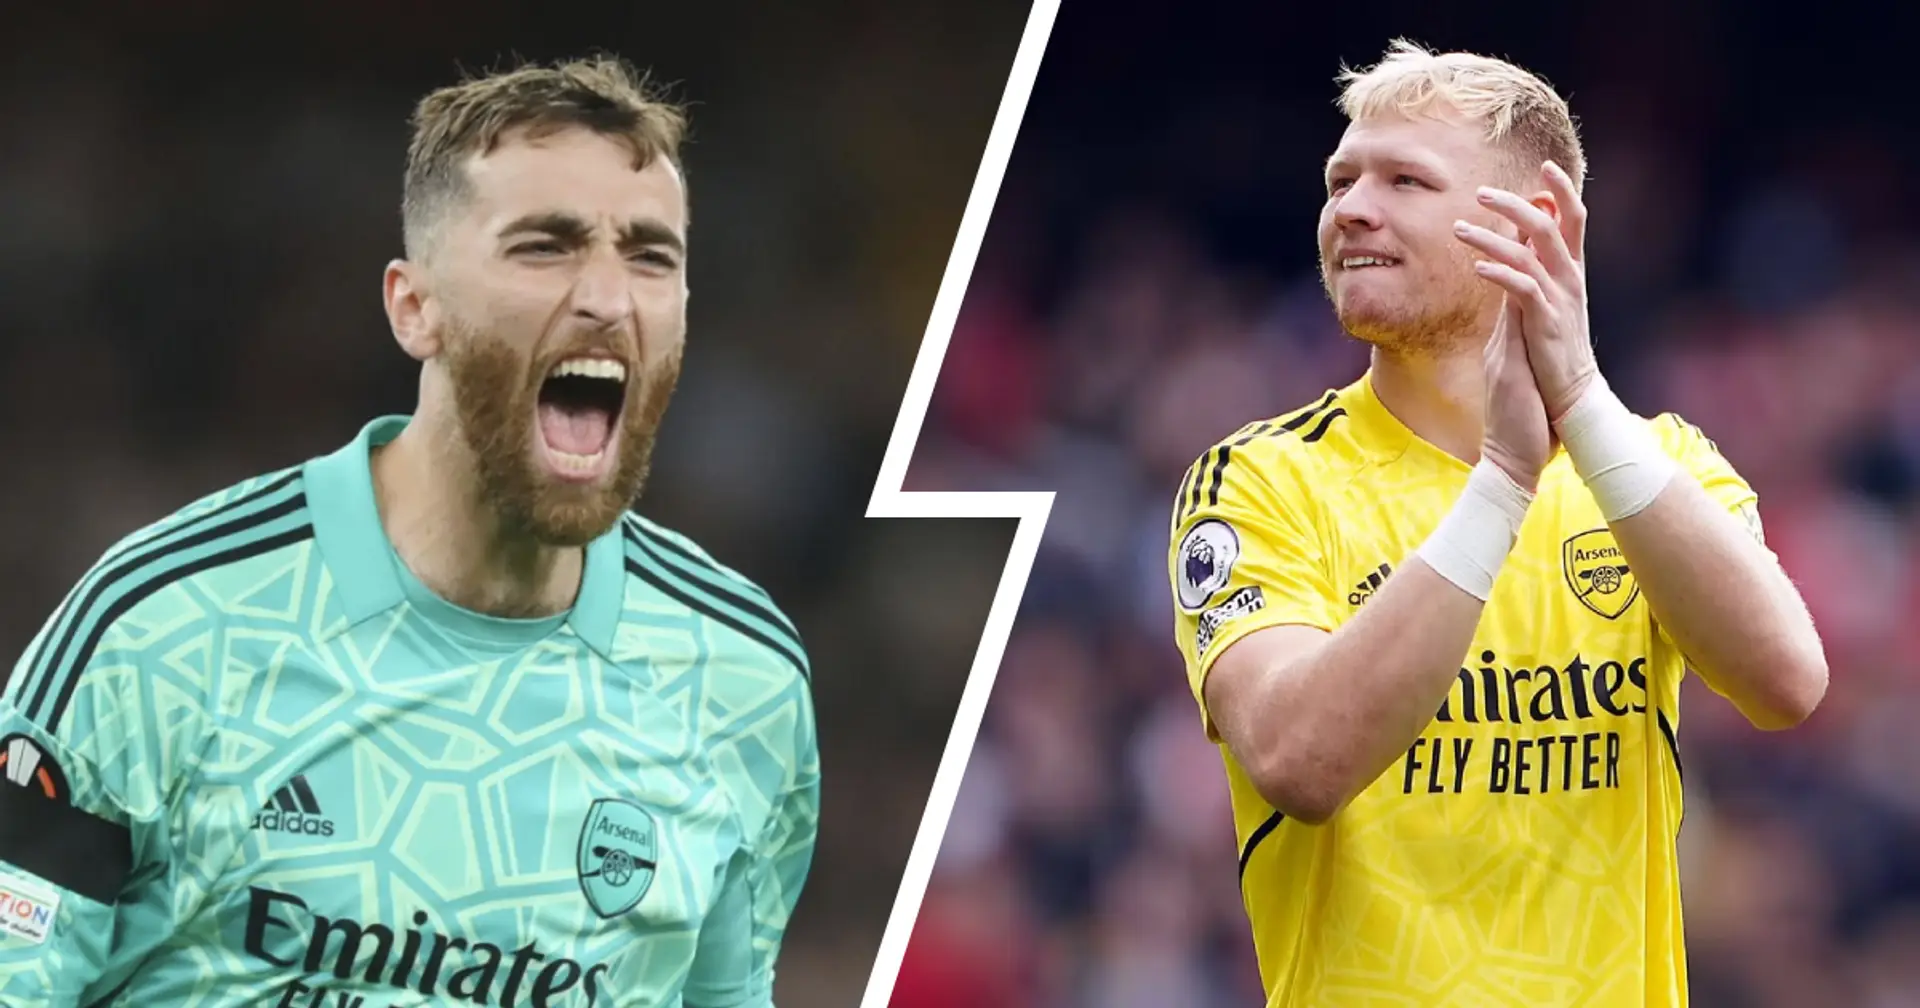 'We lose too much in buildup without Ramsdale': Arsenal fans want a better back-up goalkeeper than Turner